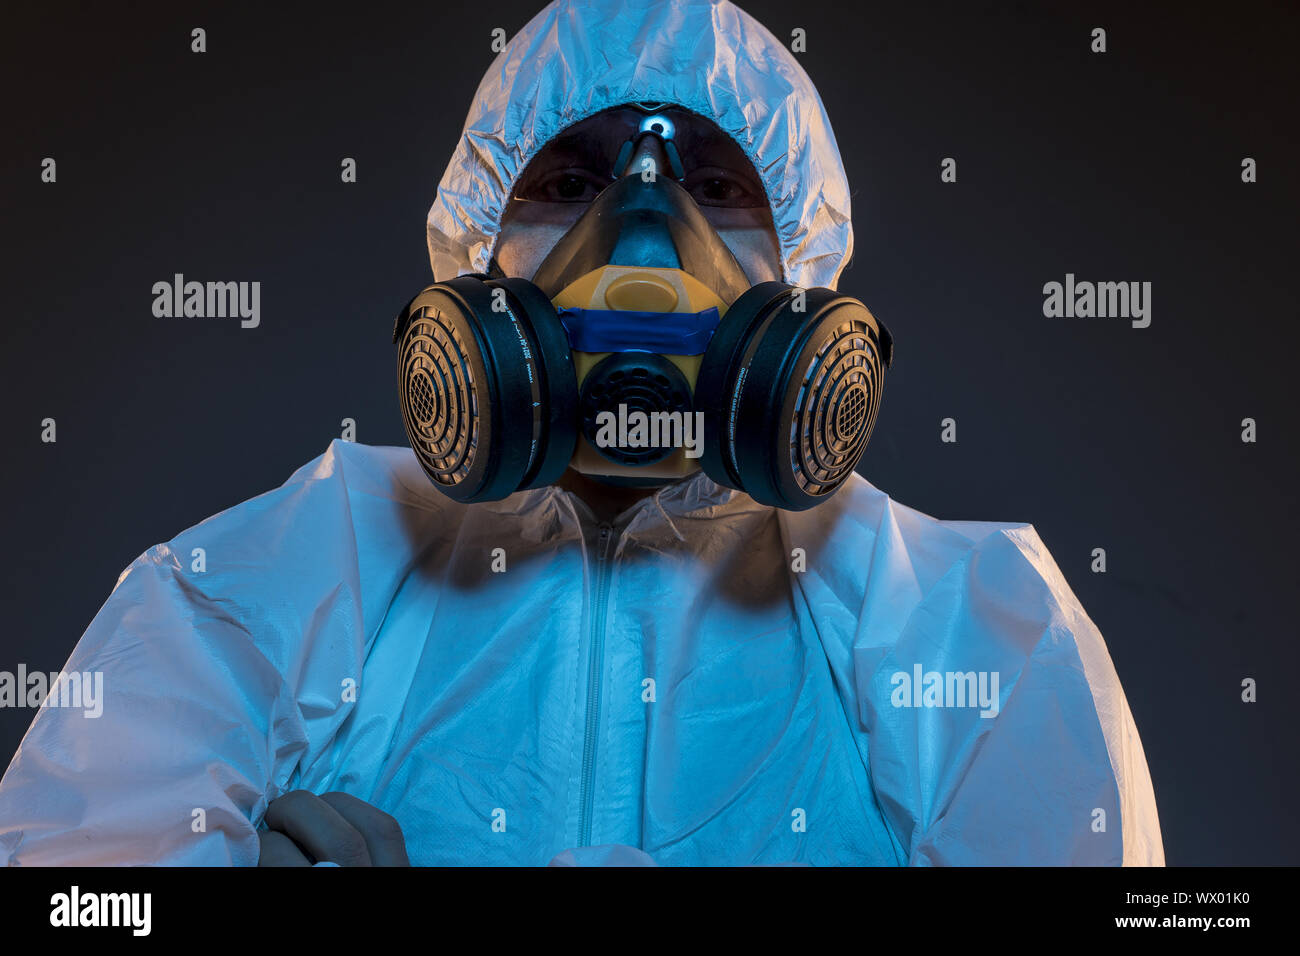 virus infection concept. Man in protective suit and antigas mask with ...